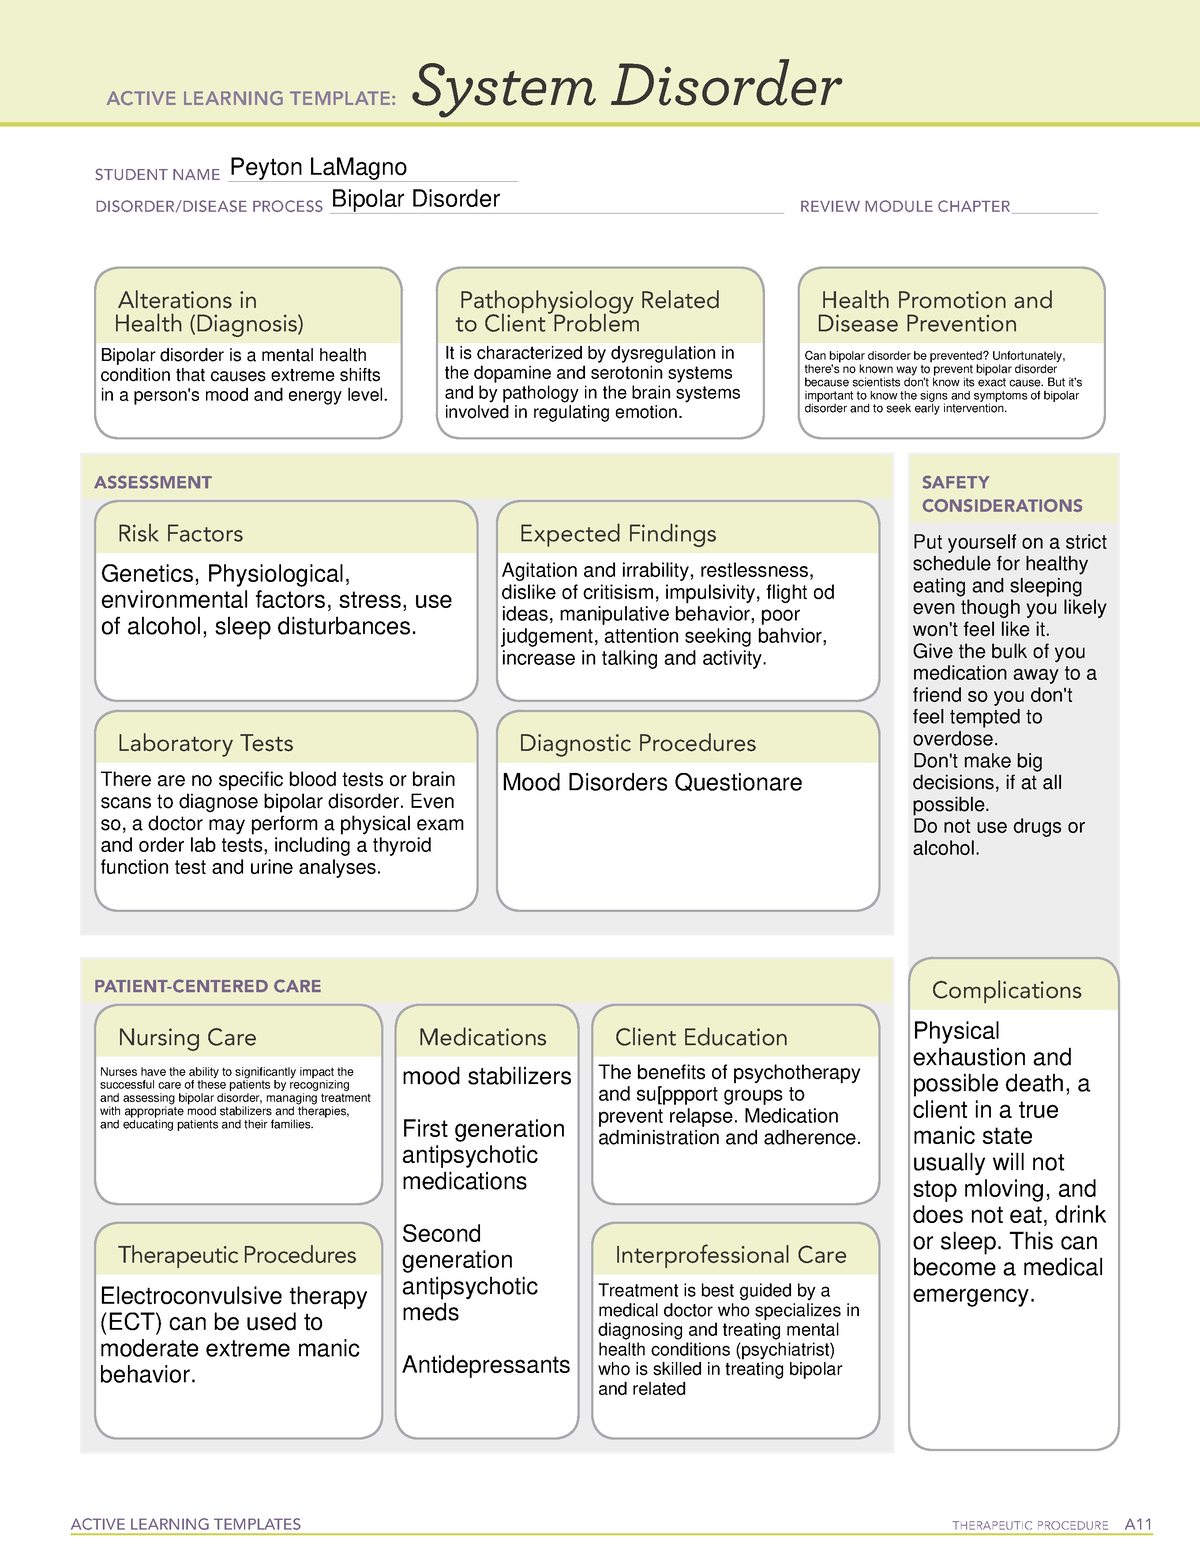 ATI Systems Disorder Bipolar Disorder ACTIVE LEARNING TEMPLATES